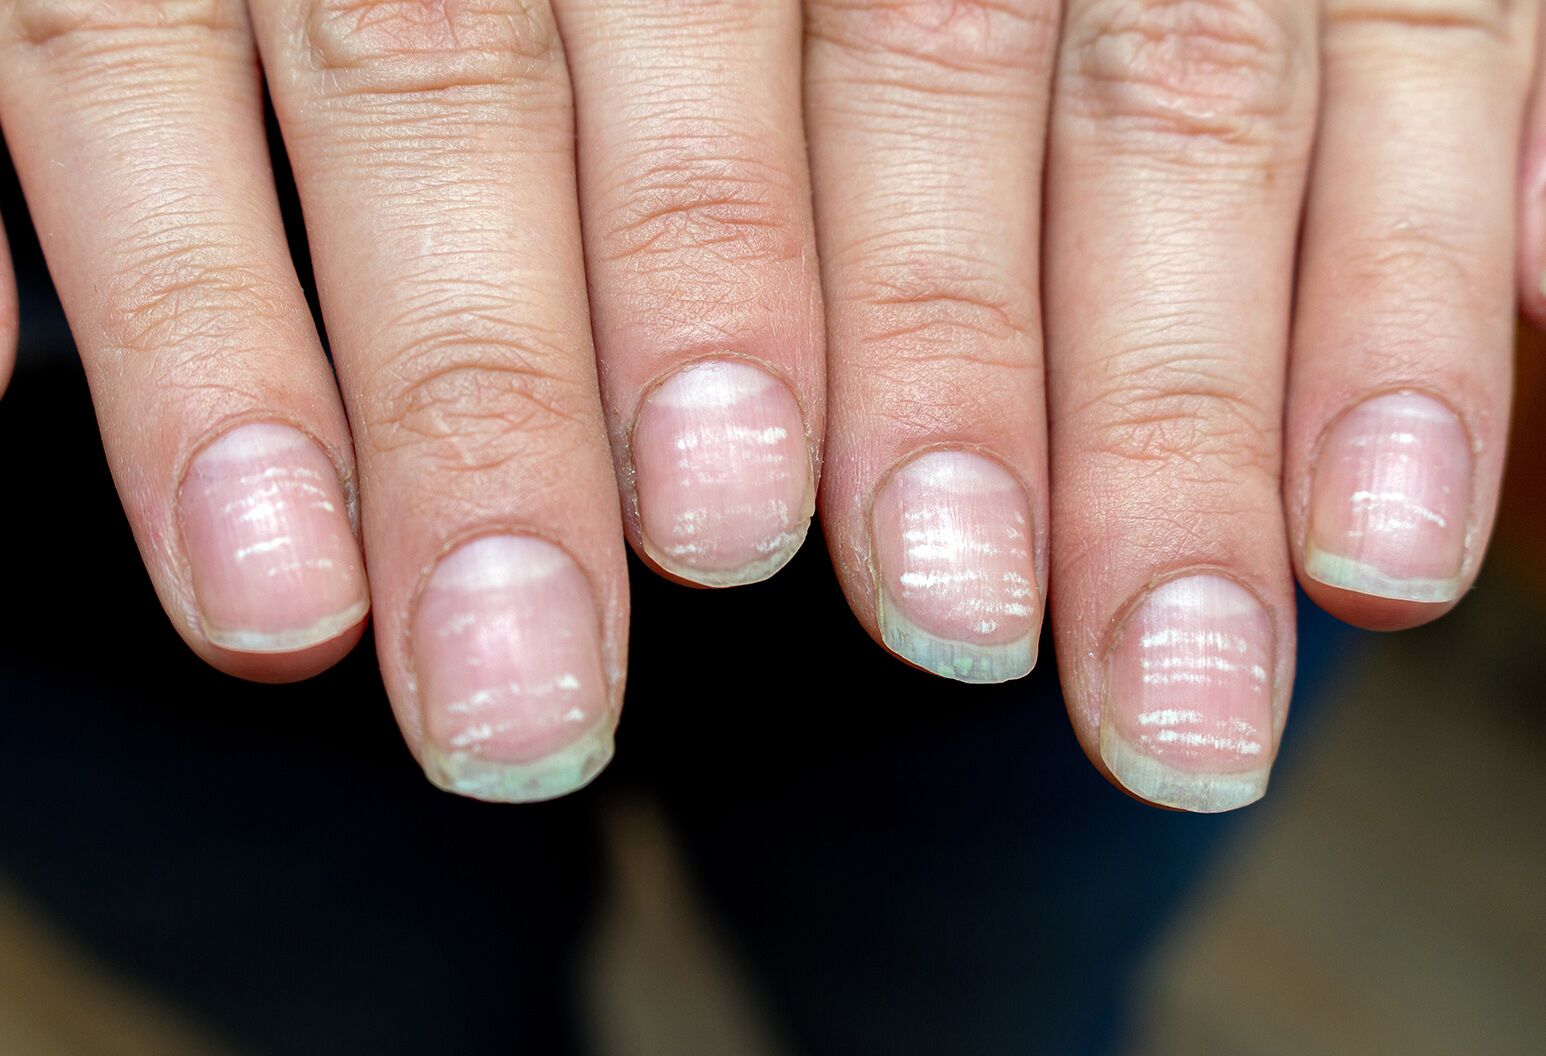 How To Have Good Nails And Improve Your Nail Health